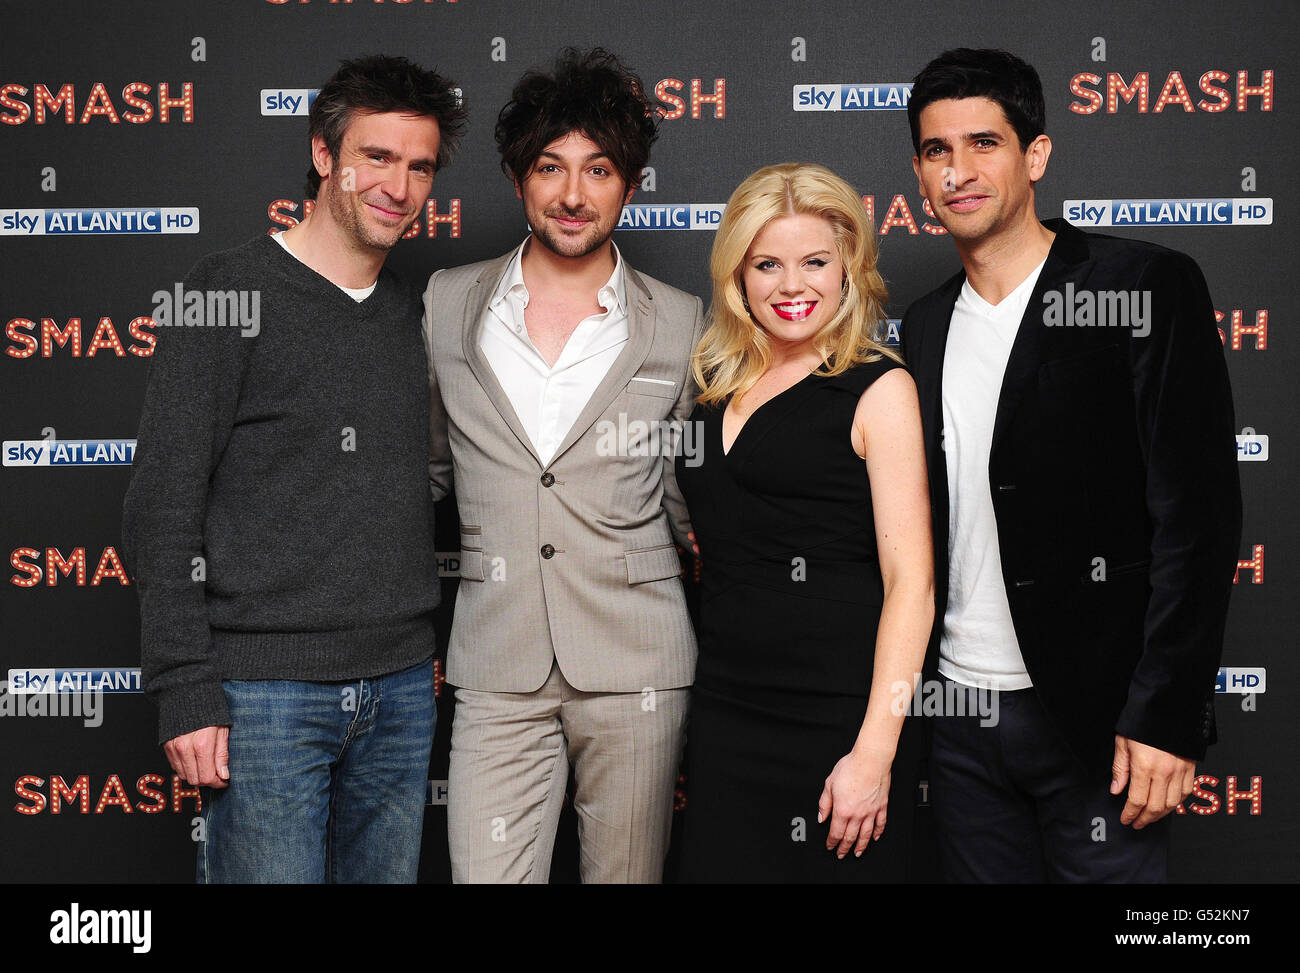 Jack Davenport, Megan Hilty and Raza Jaffrey are seen with (second left) Alex Zane at a screening of new musical drama Smash at the Soho Hotel in London, showing on April 21st on Sky Atlantic HD. Stock Photo